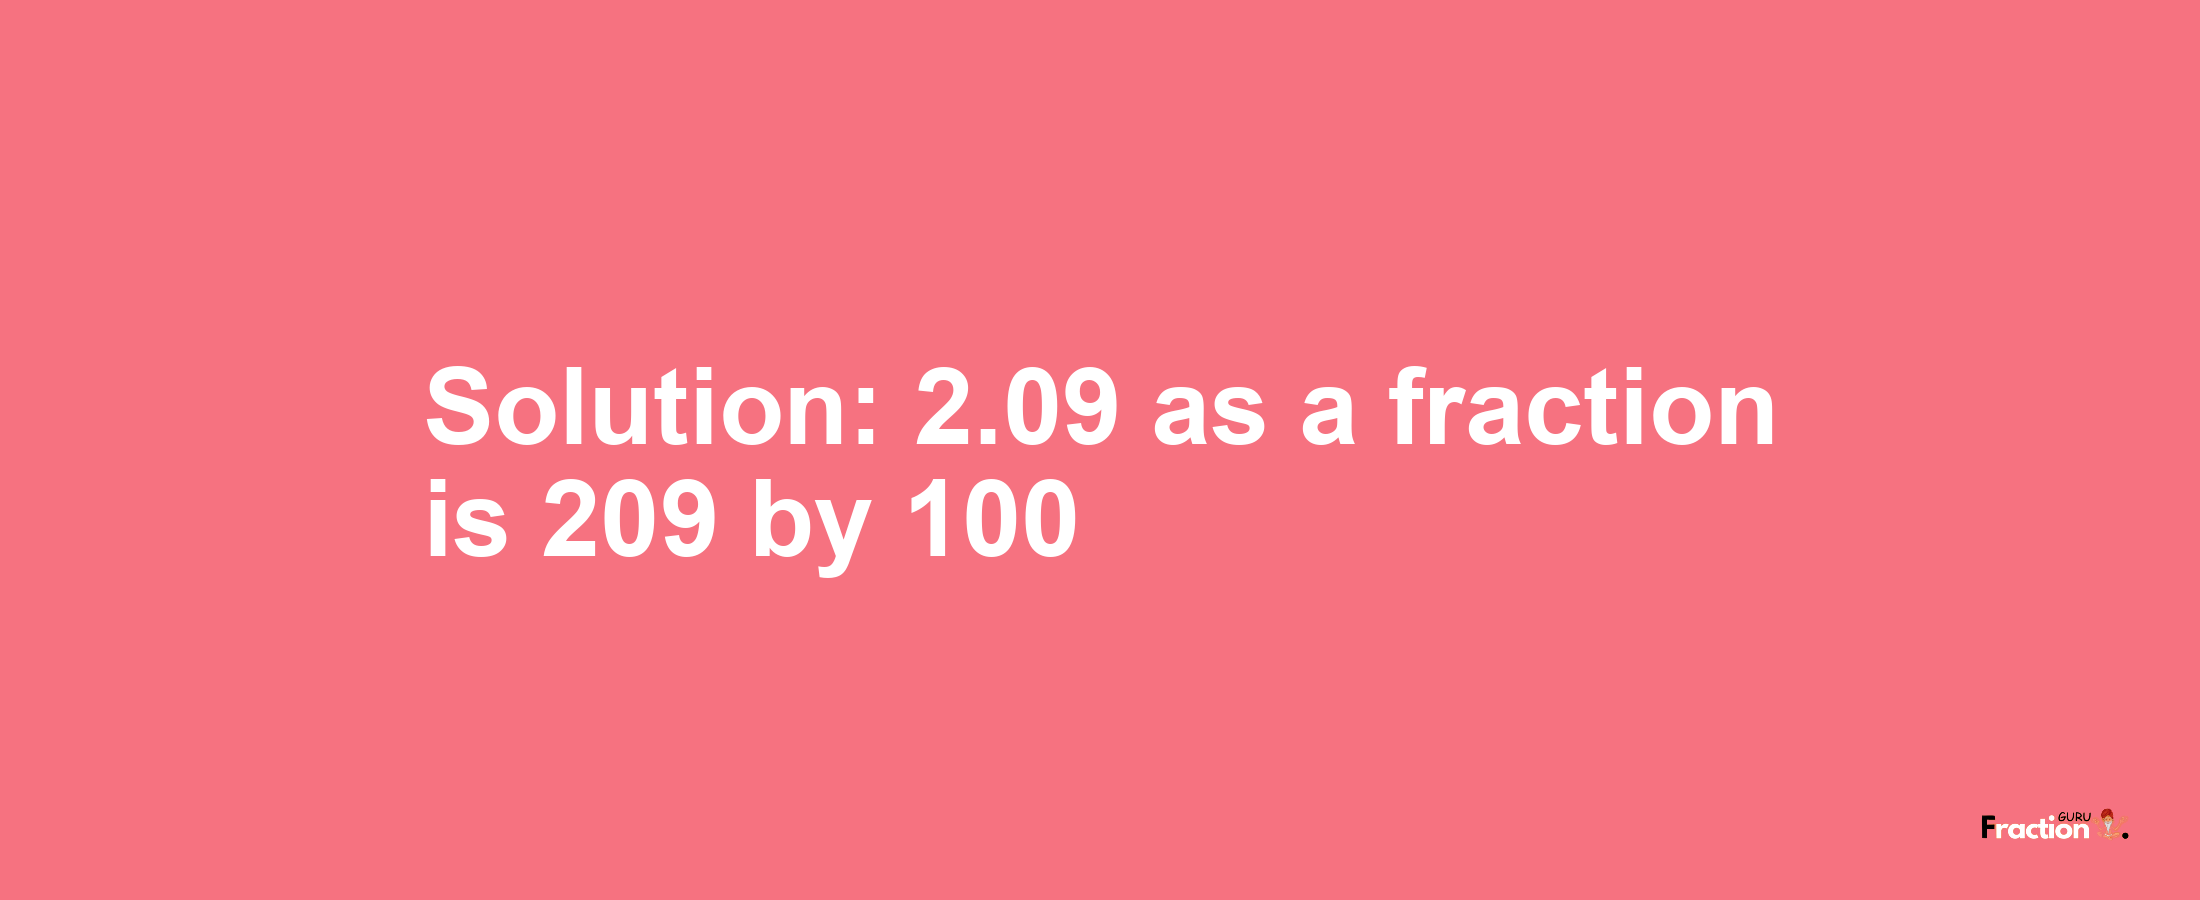 Solution:2.09 as a fraction is 209/100